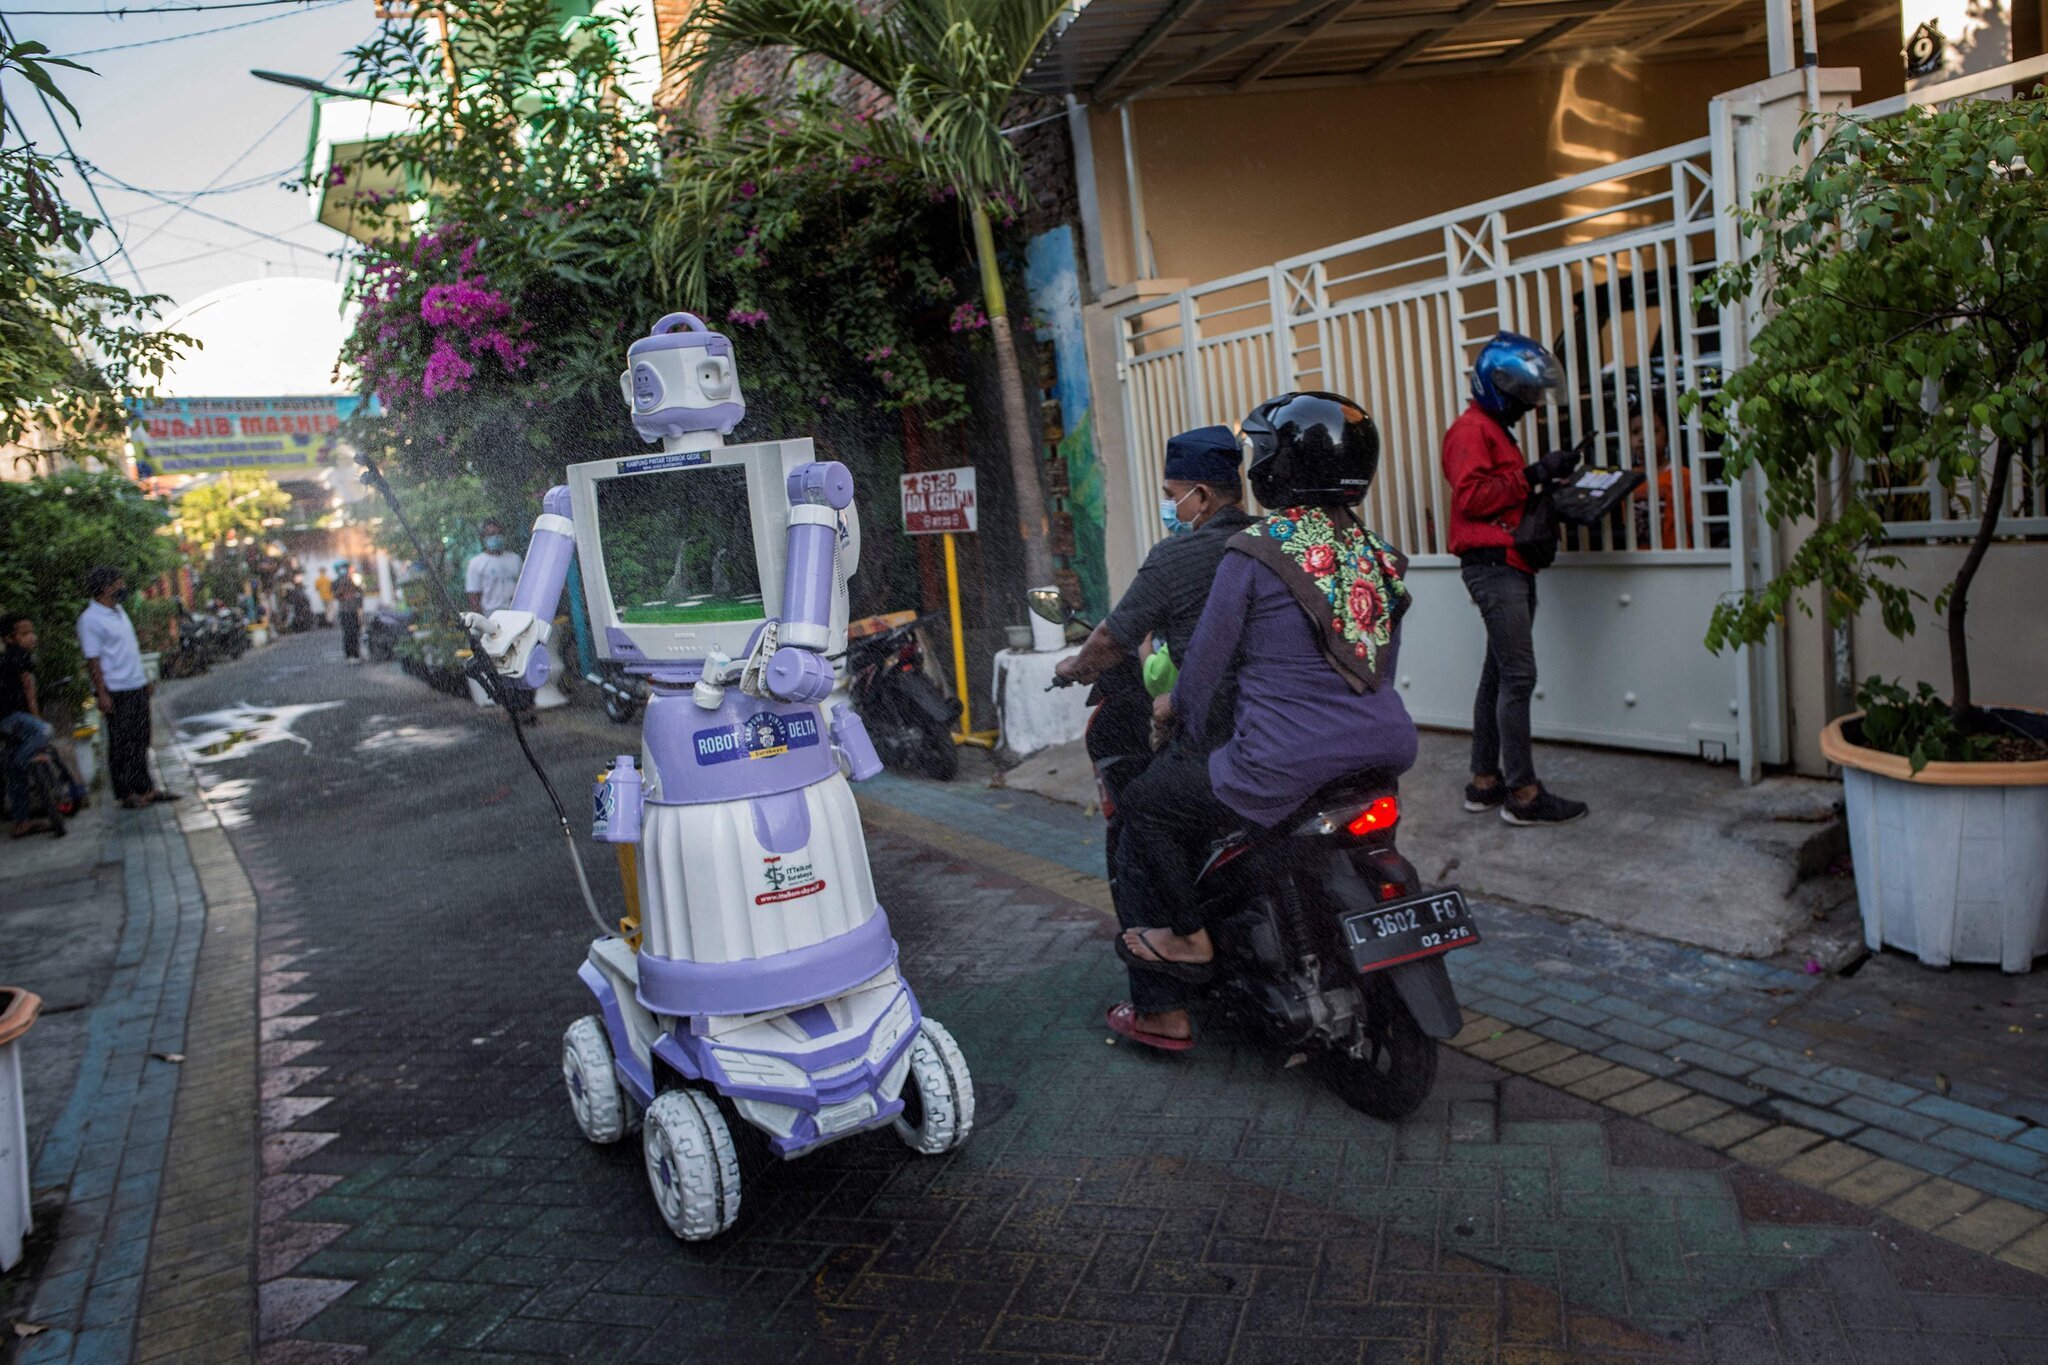 A cream and purple robot made from upcycled parts passing a couple on a scooter in a paved lane